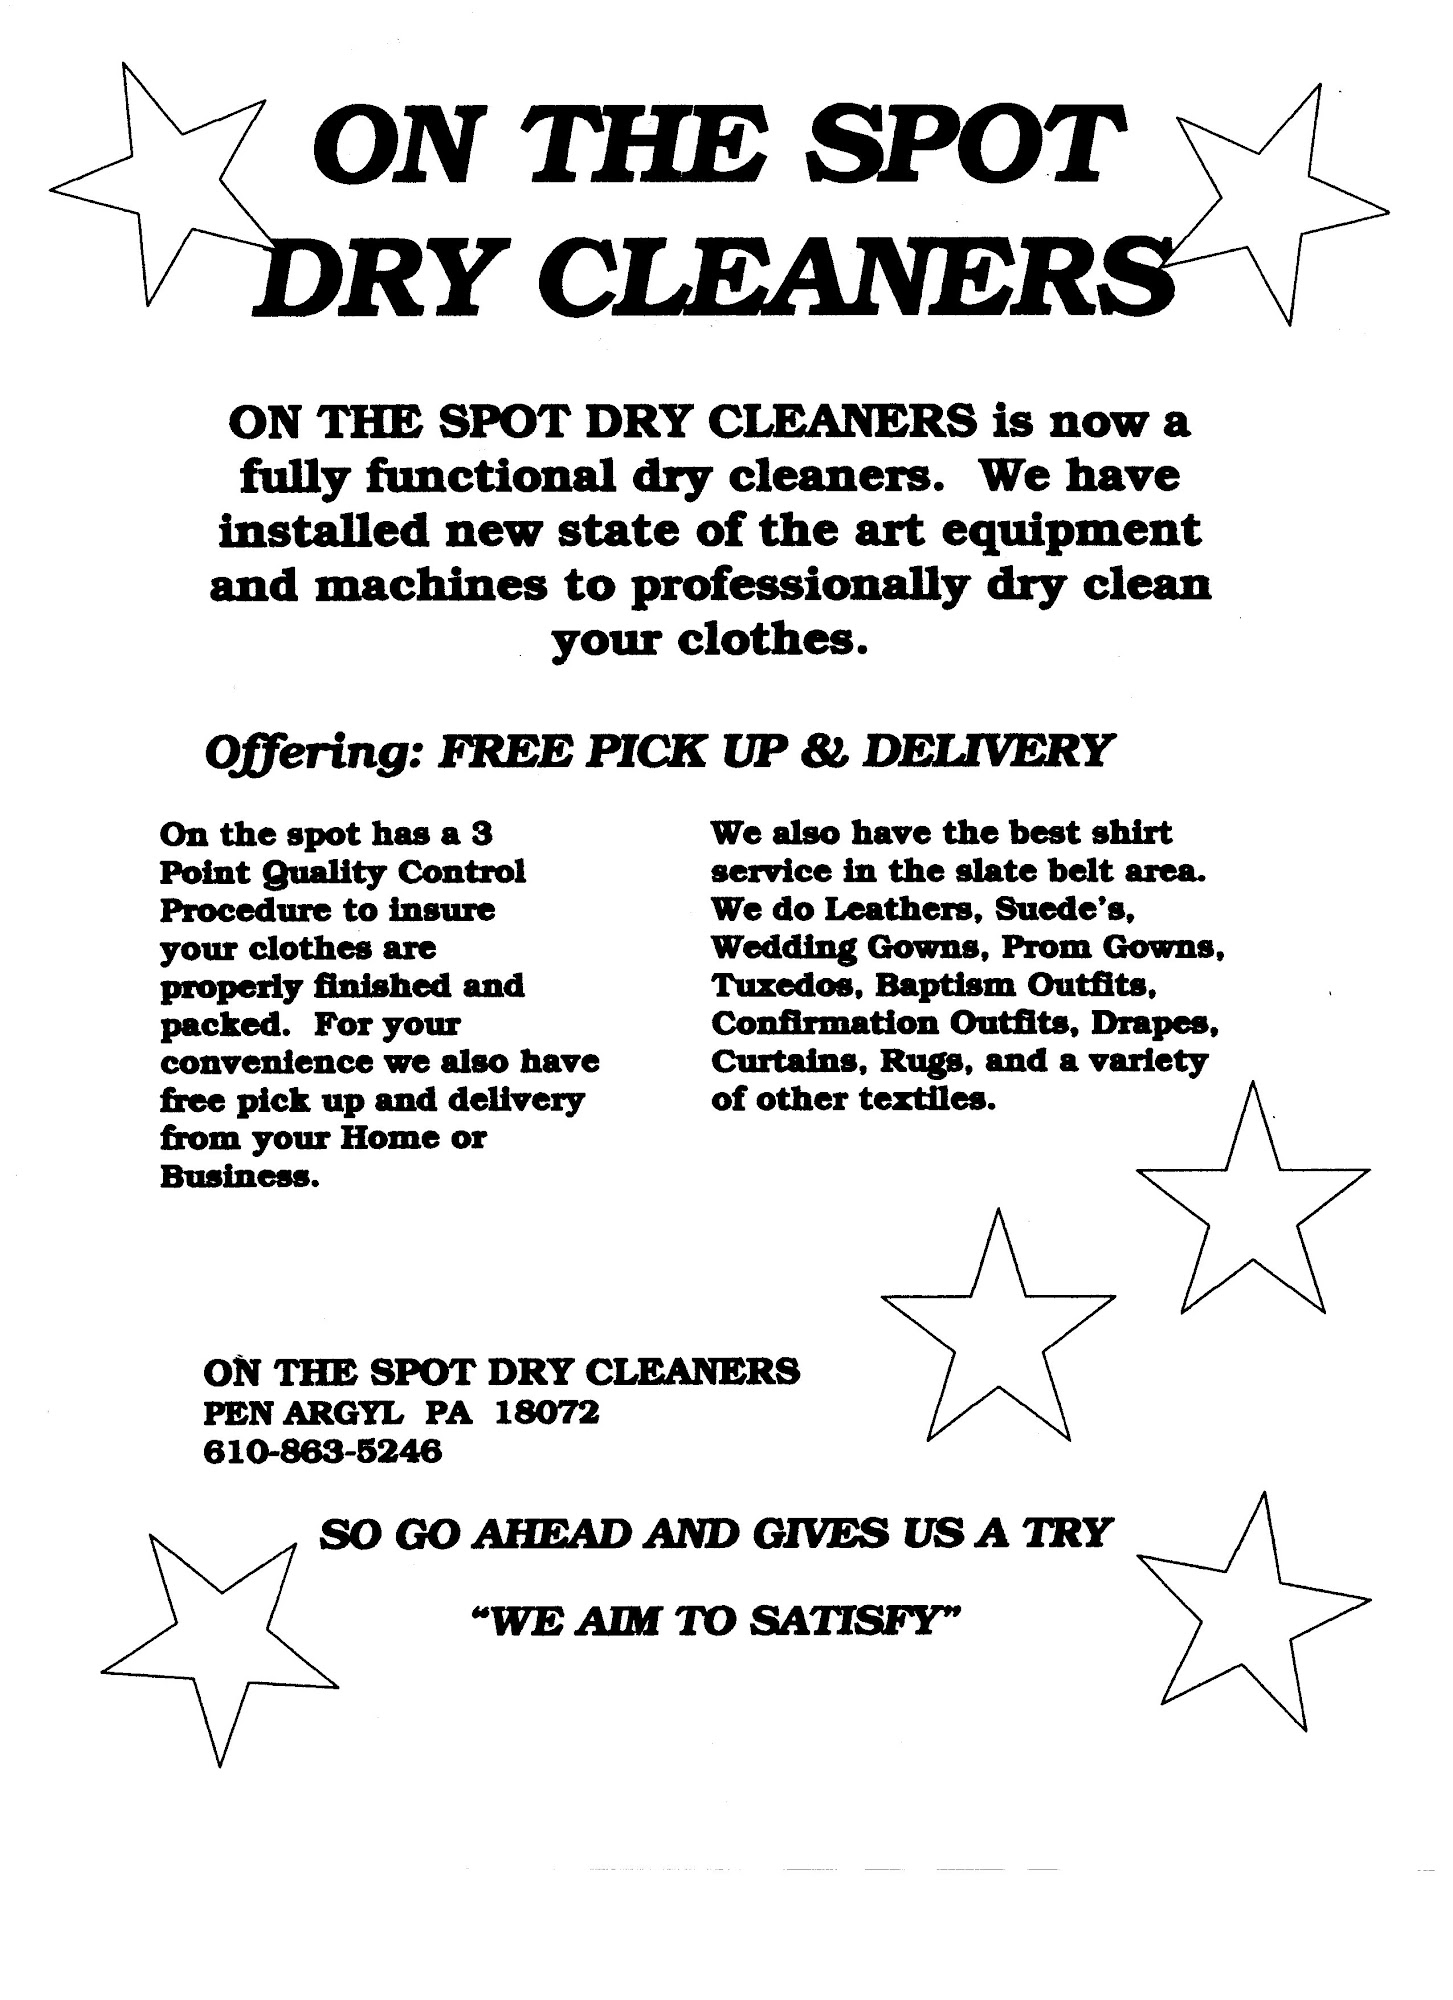 On the Spot Dry Cleaners 229 S Robinson Ave, Pen Argyl Pennsylvania 18072